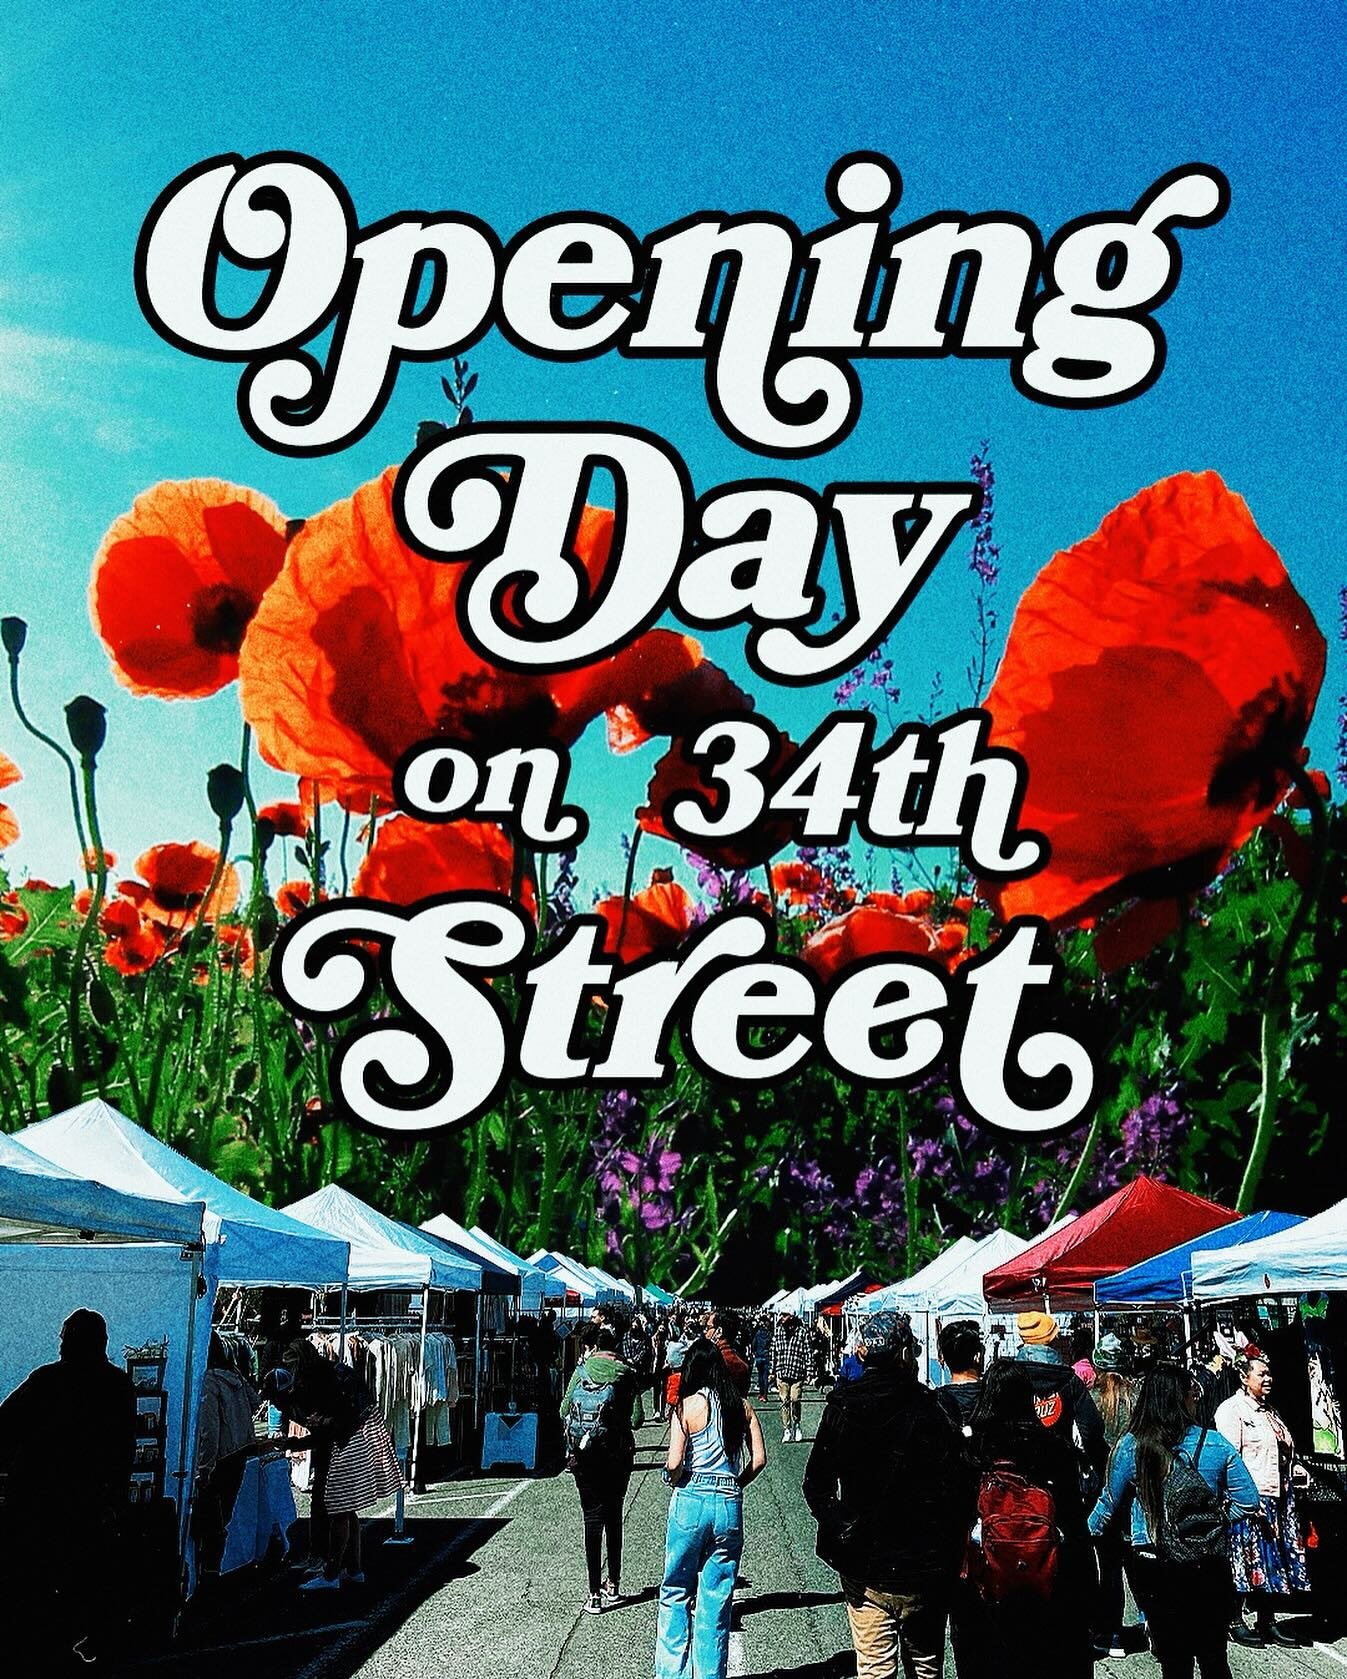 It&rsquo;s officially Spring! We&rsquo;re back in full bloom on 34th Street starting today with 165 booths at the @fremontsundaymarket . Come check out our expanded food district for brunch with all of our tasty processors too in lower lot! @tone.dj 